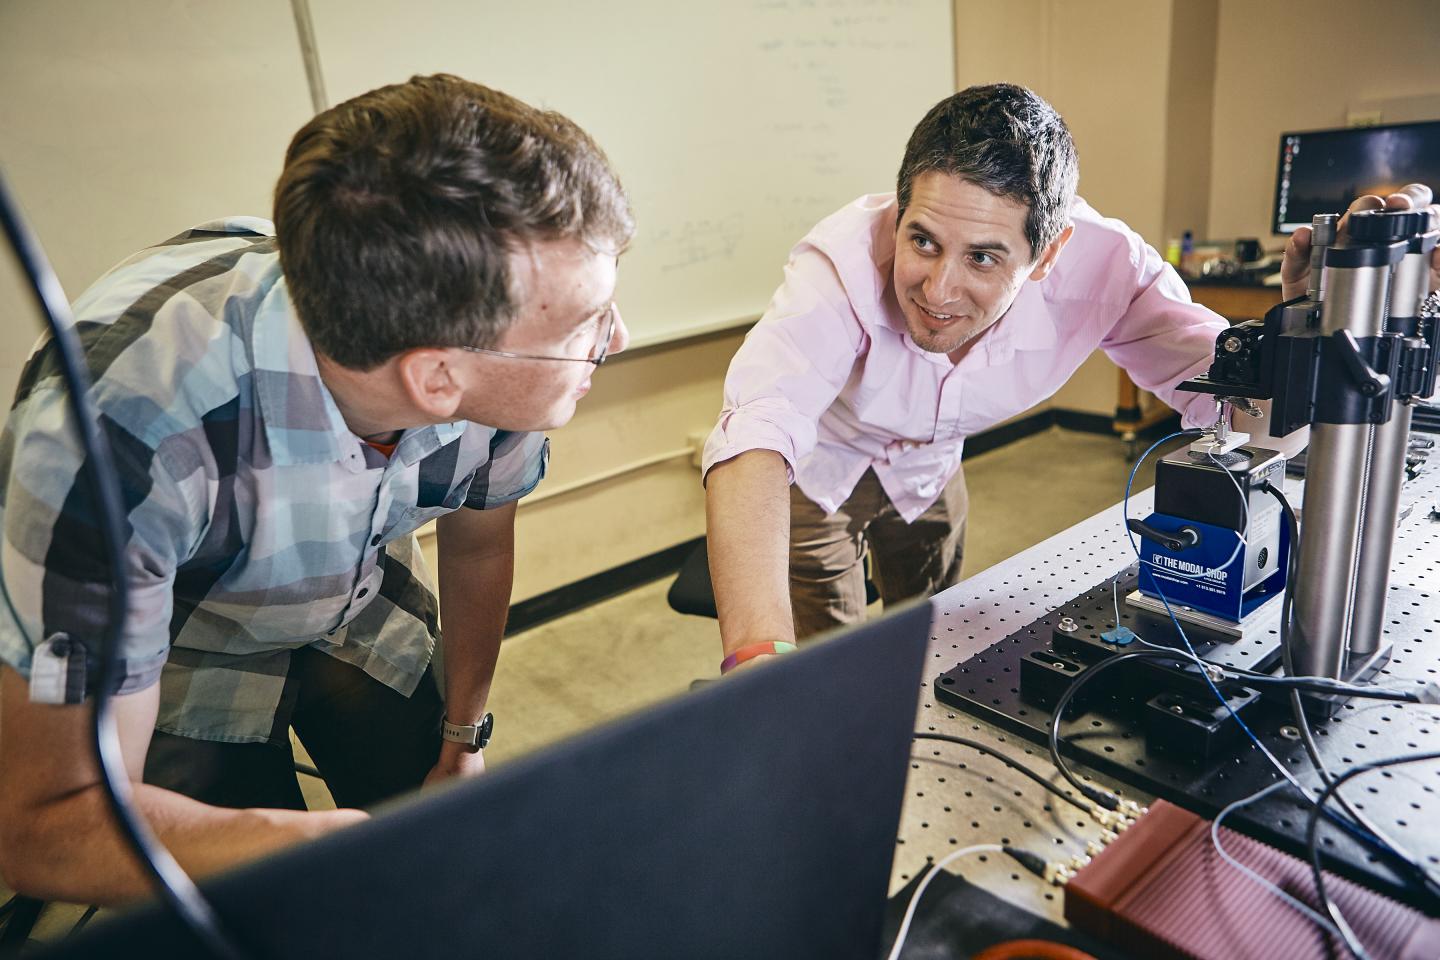 Mechanical Engineering Researchers Mark Jankauski and Erick Johnson Converse in their Lab